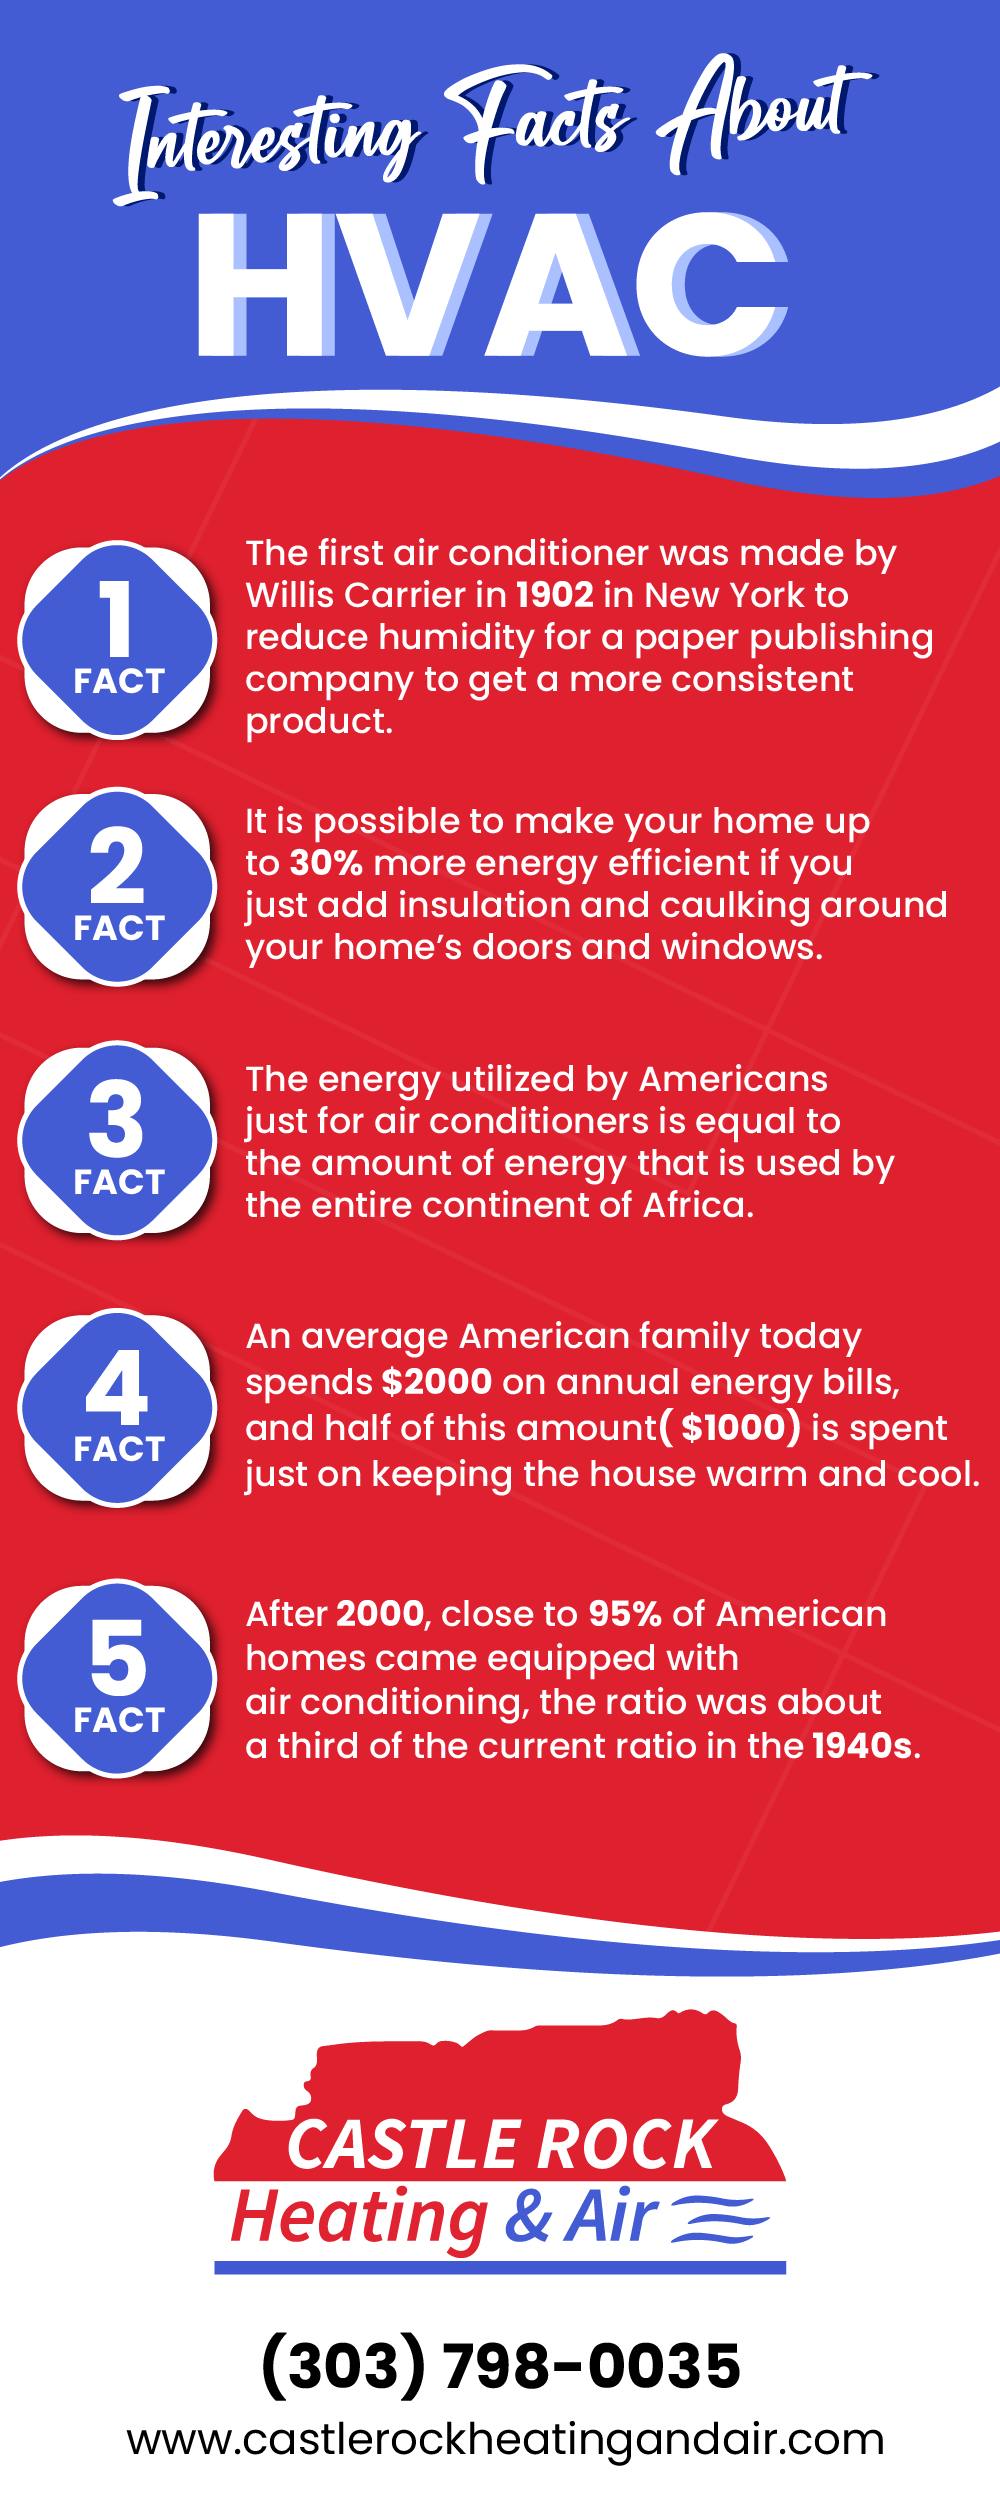 Interesting Facts About HVAC